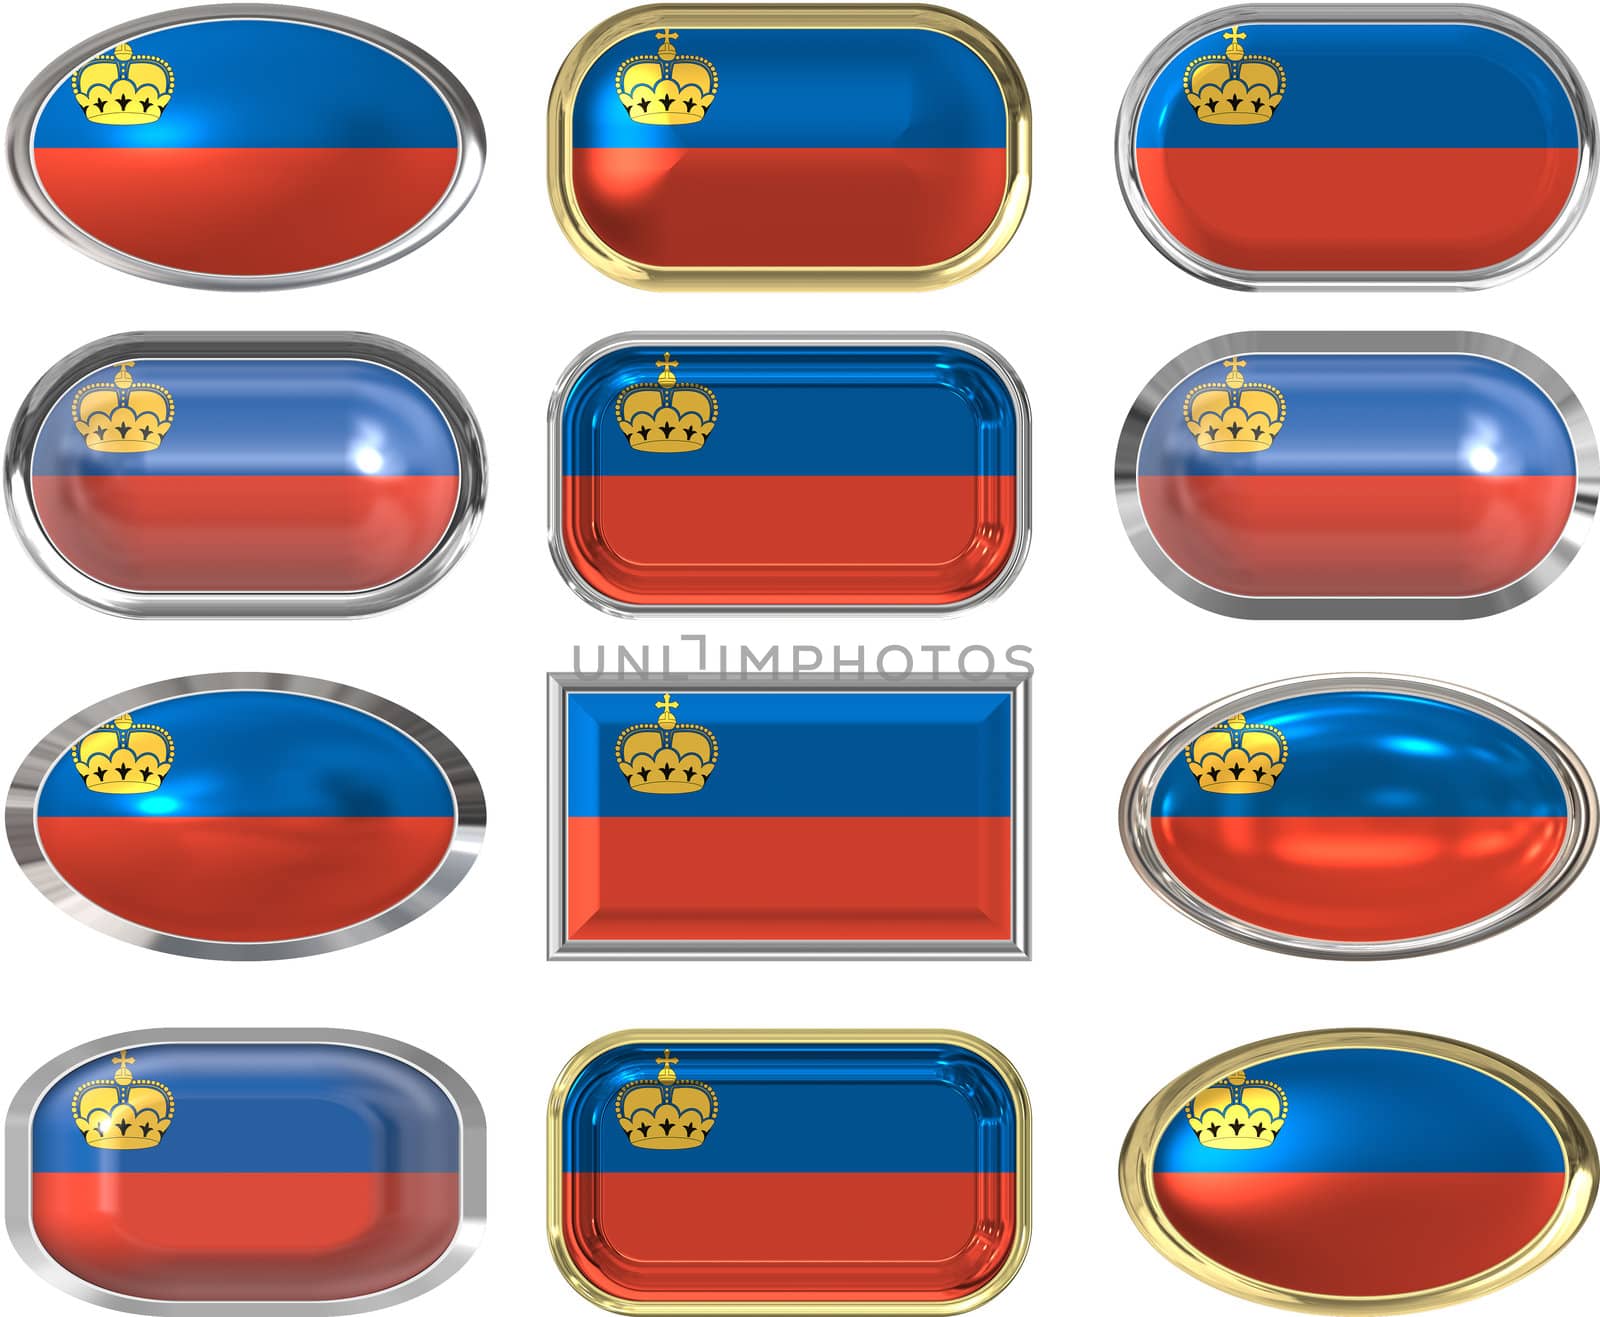 12 buttons of the Flag of liechtenstein by clearviewstock